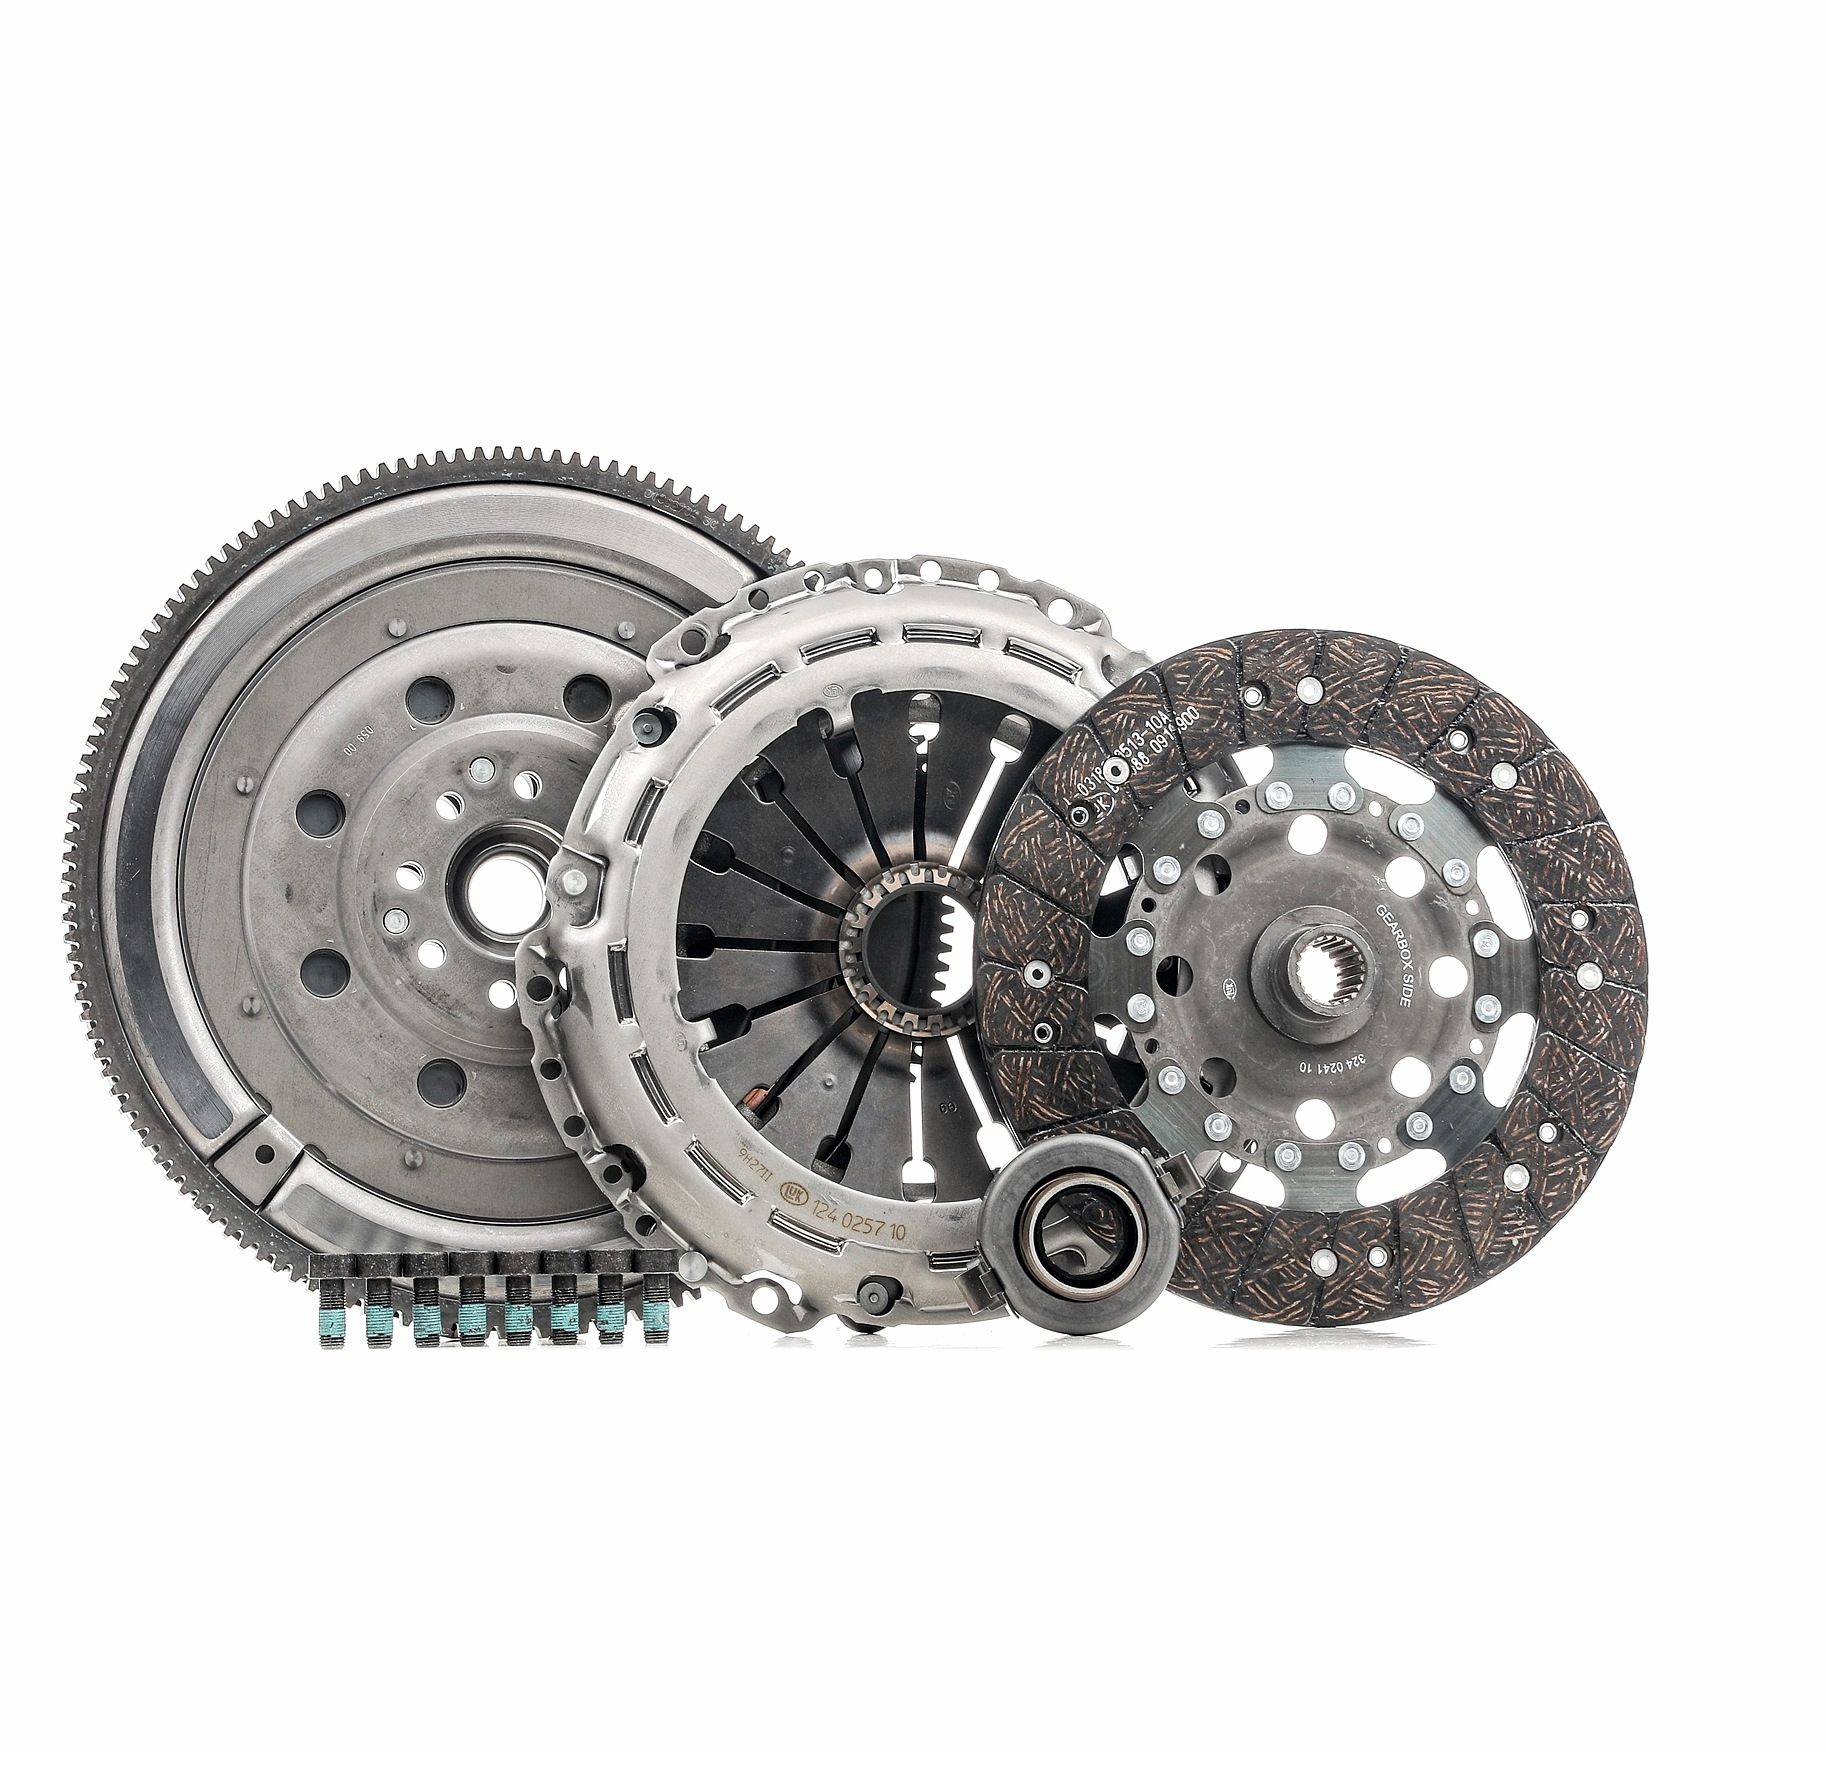 LuK BR 0241 600 0050 00 Clutch kit without pilot bearing, with clutch release bearing, with flywheel, with screw set, Dual-mass flywheel with friction control plate